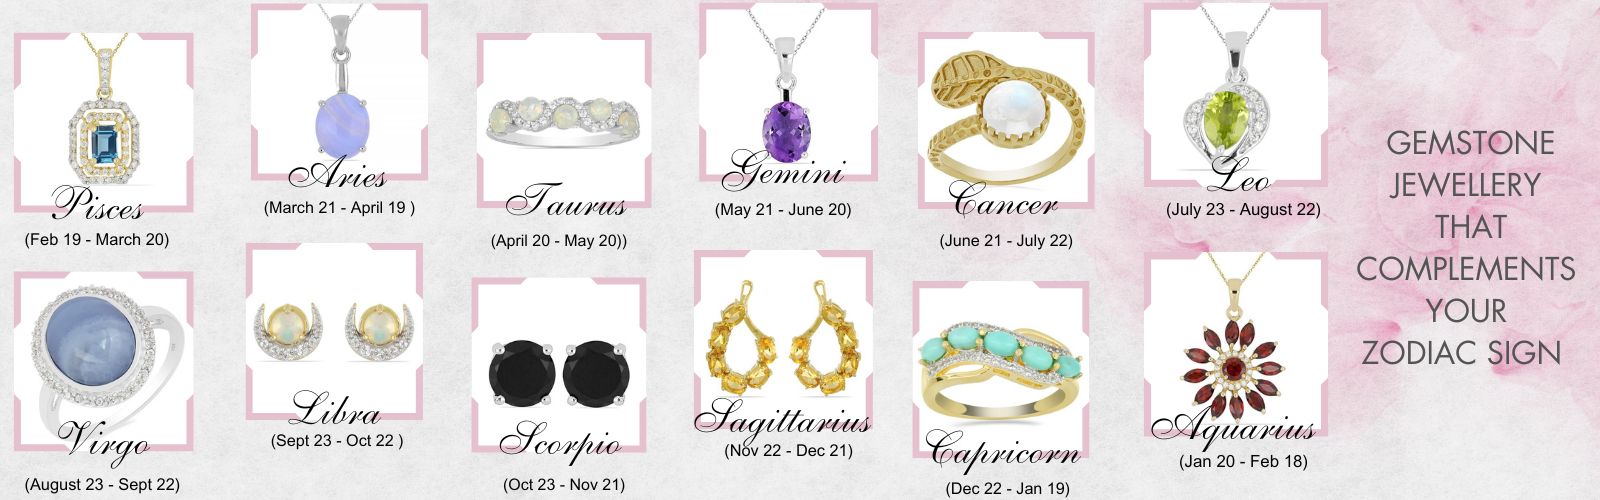 gemstone jewelry that compliments your zodiac sign